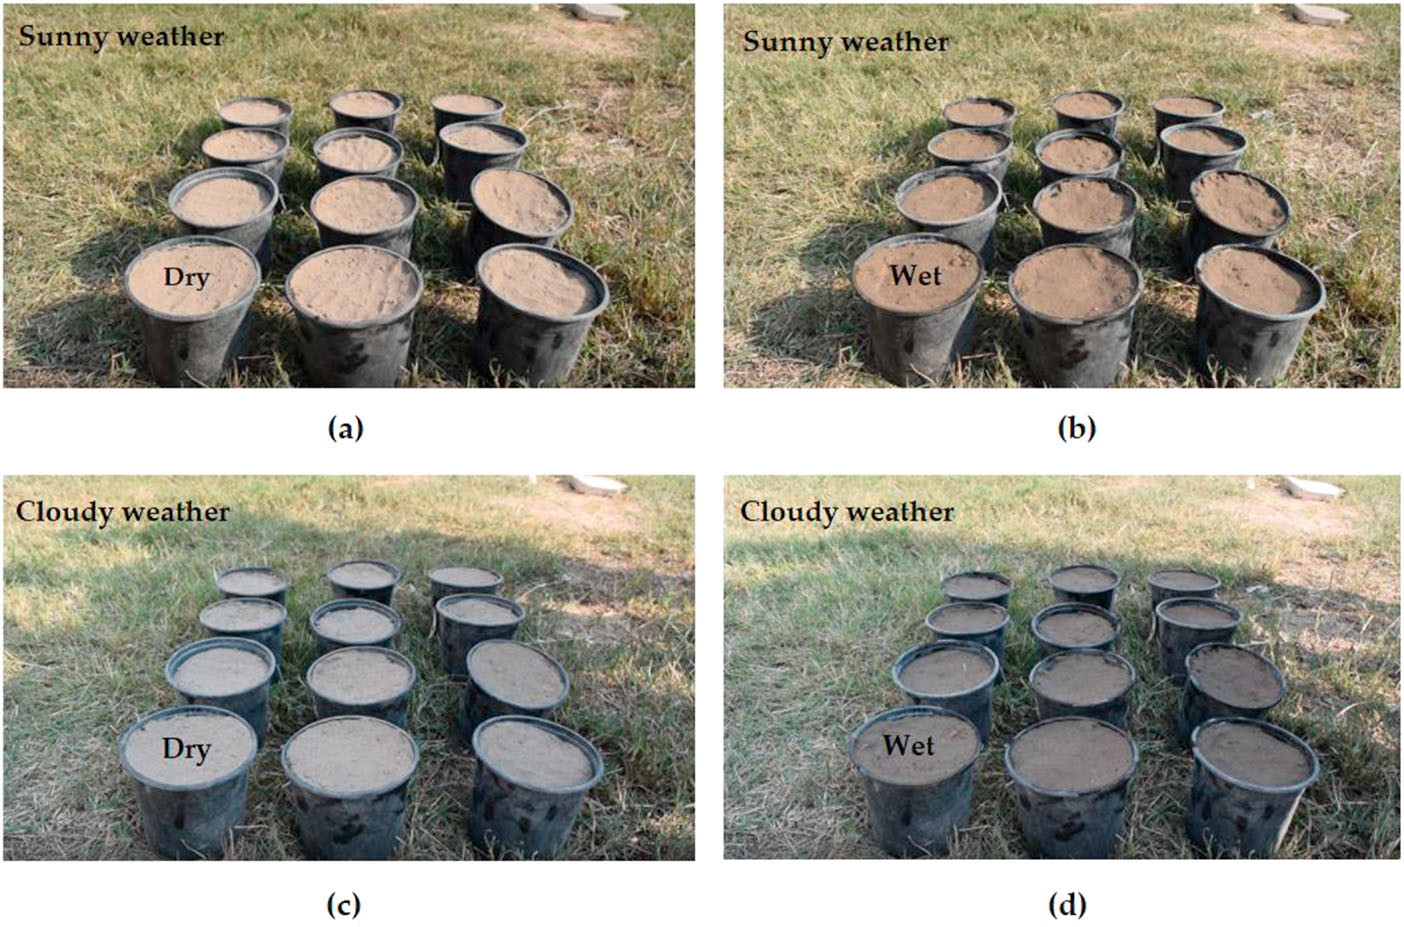 Data collection of the loam soil under four scenarios (a) S1: sunny-dry, (b) S2: sunny-wet, (c) S3: shadow-dry, and (d) S4: shadow-wet.